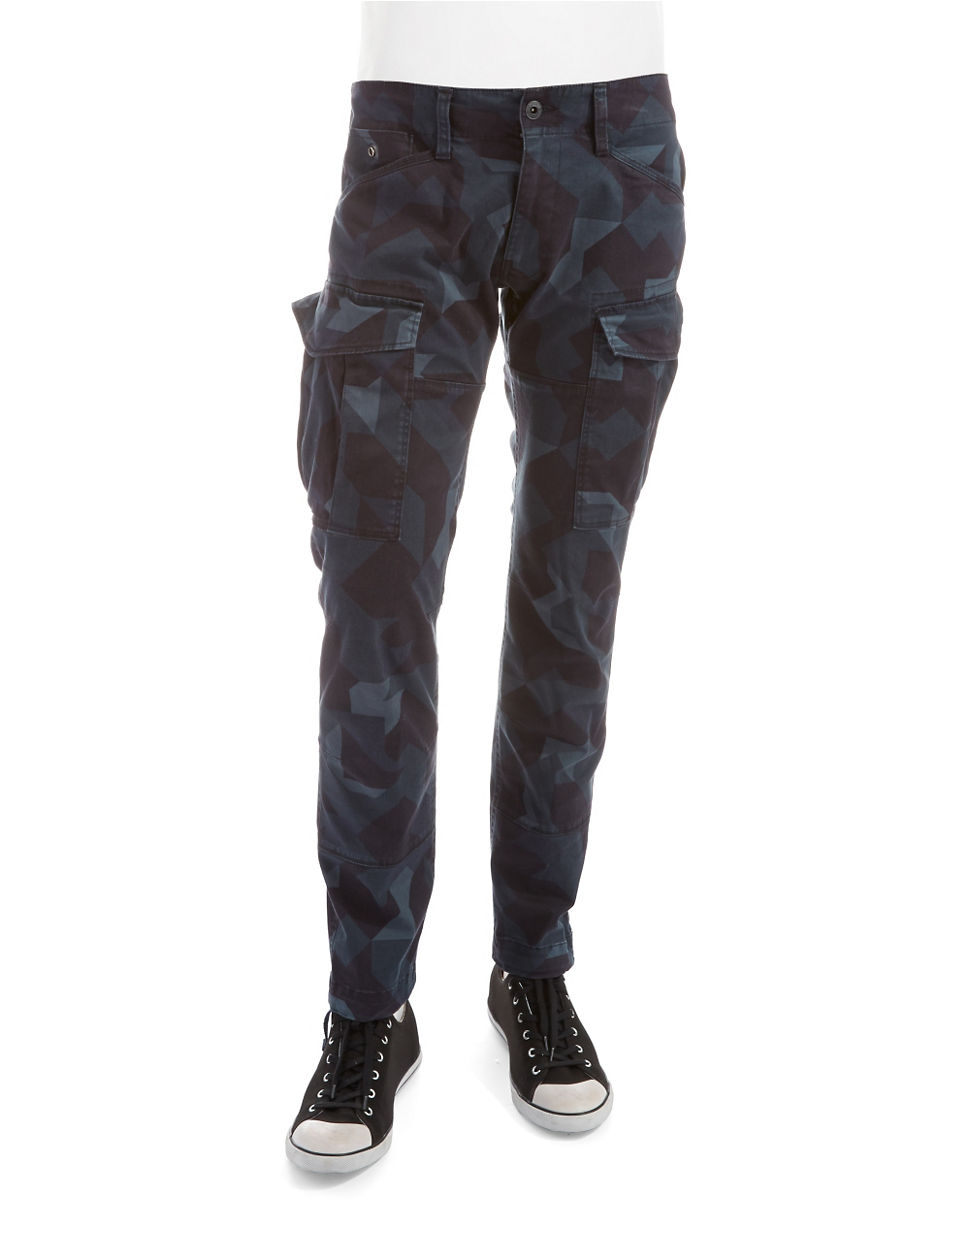 G-Star RAW Camouflage Print Cargo Trousers in Blue for Men - Lyst